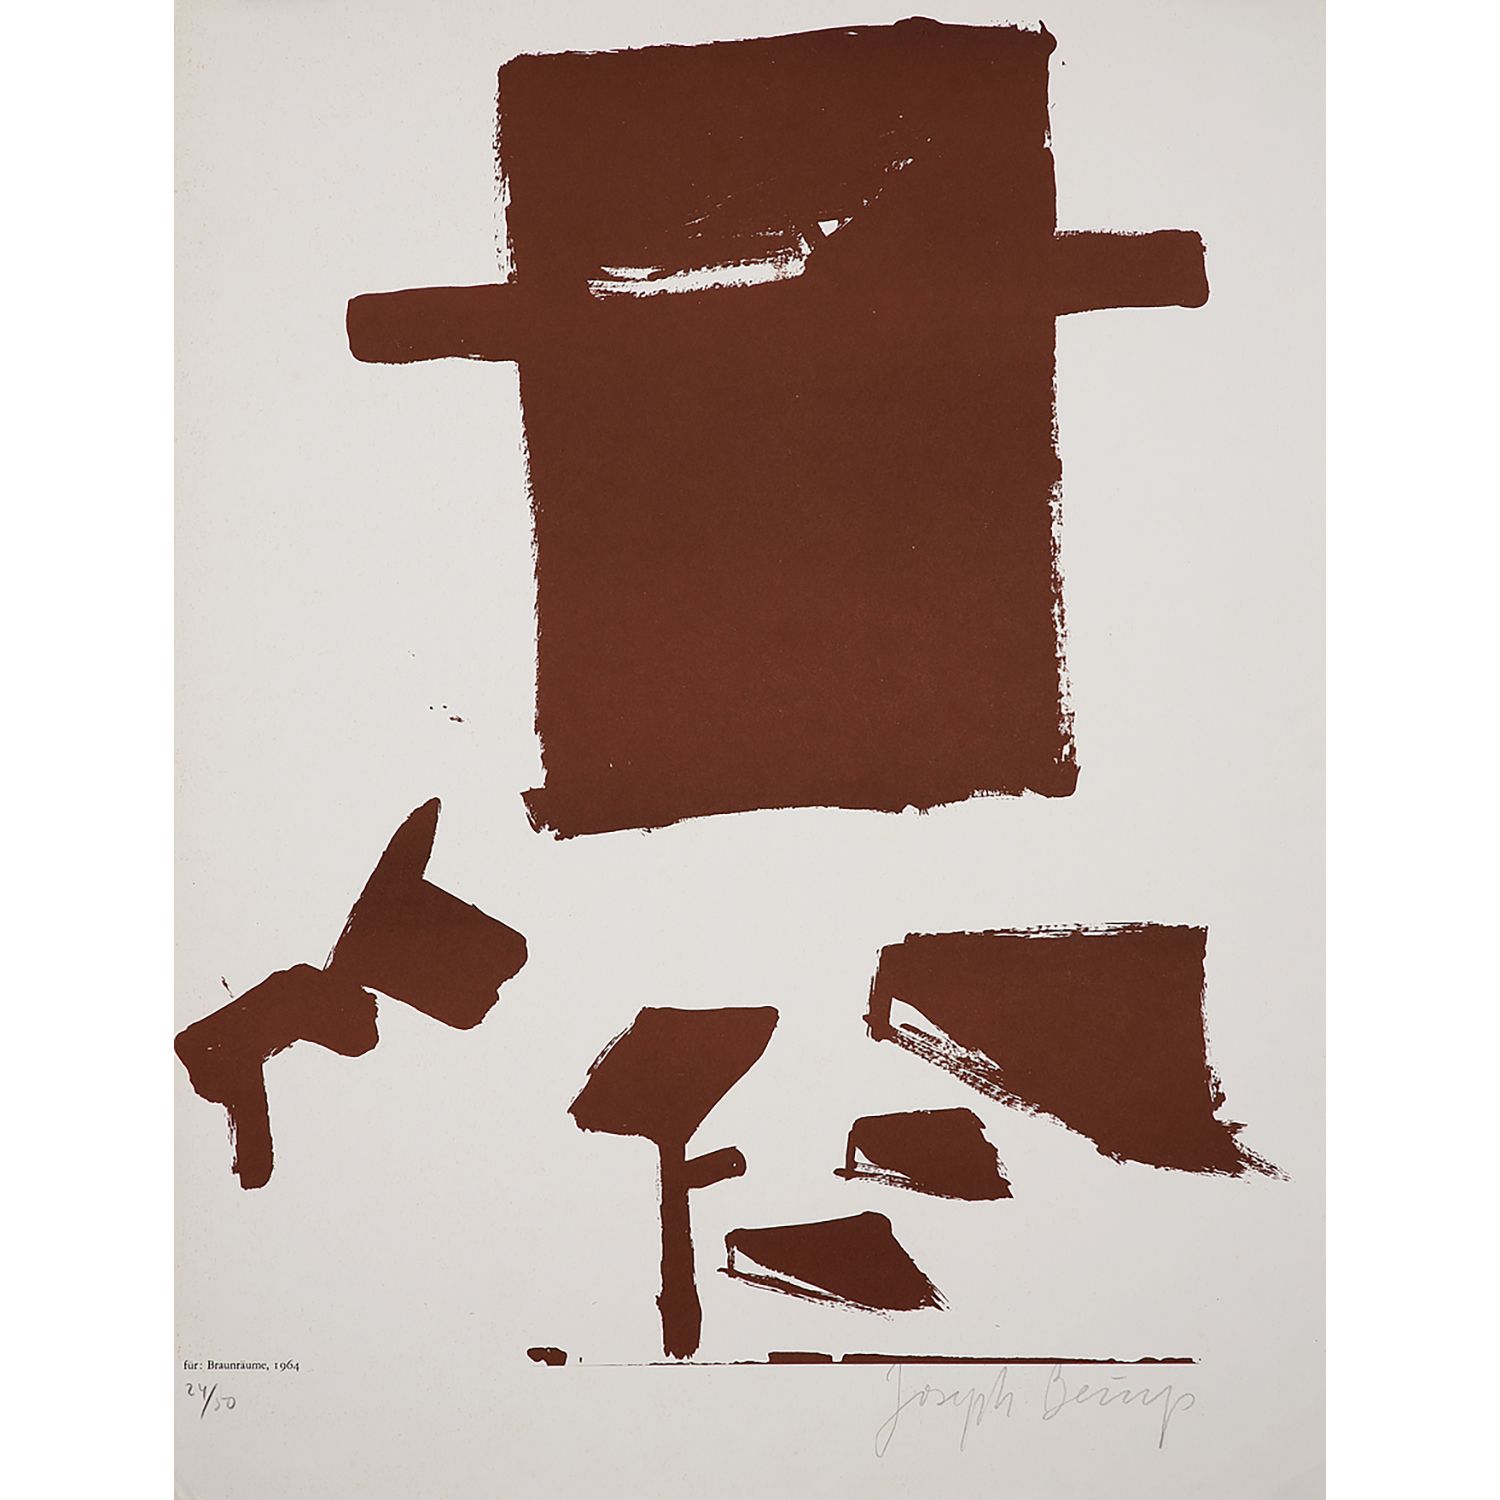 JOSEPH BEUYS (1921-1986) JOSEPH BEUYS (1921-1986)
COMPOSITION
Farblithographie a&hellip;